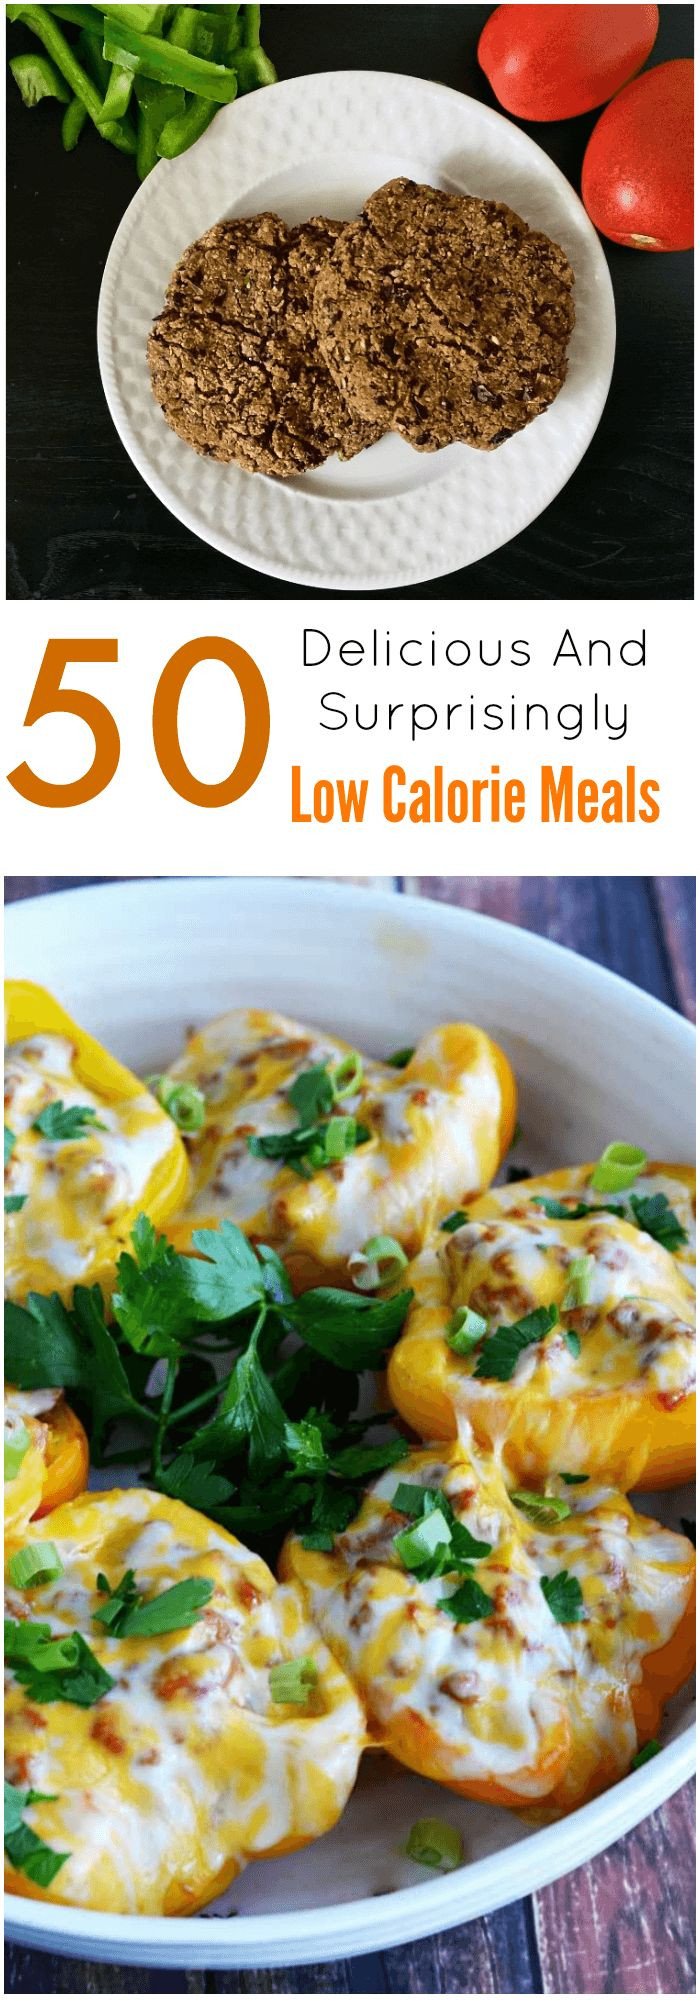 Low Cal Dinners
 50 Delicious And Surprisingly Low Calorie Meals